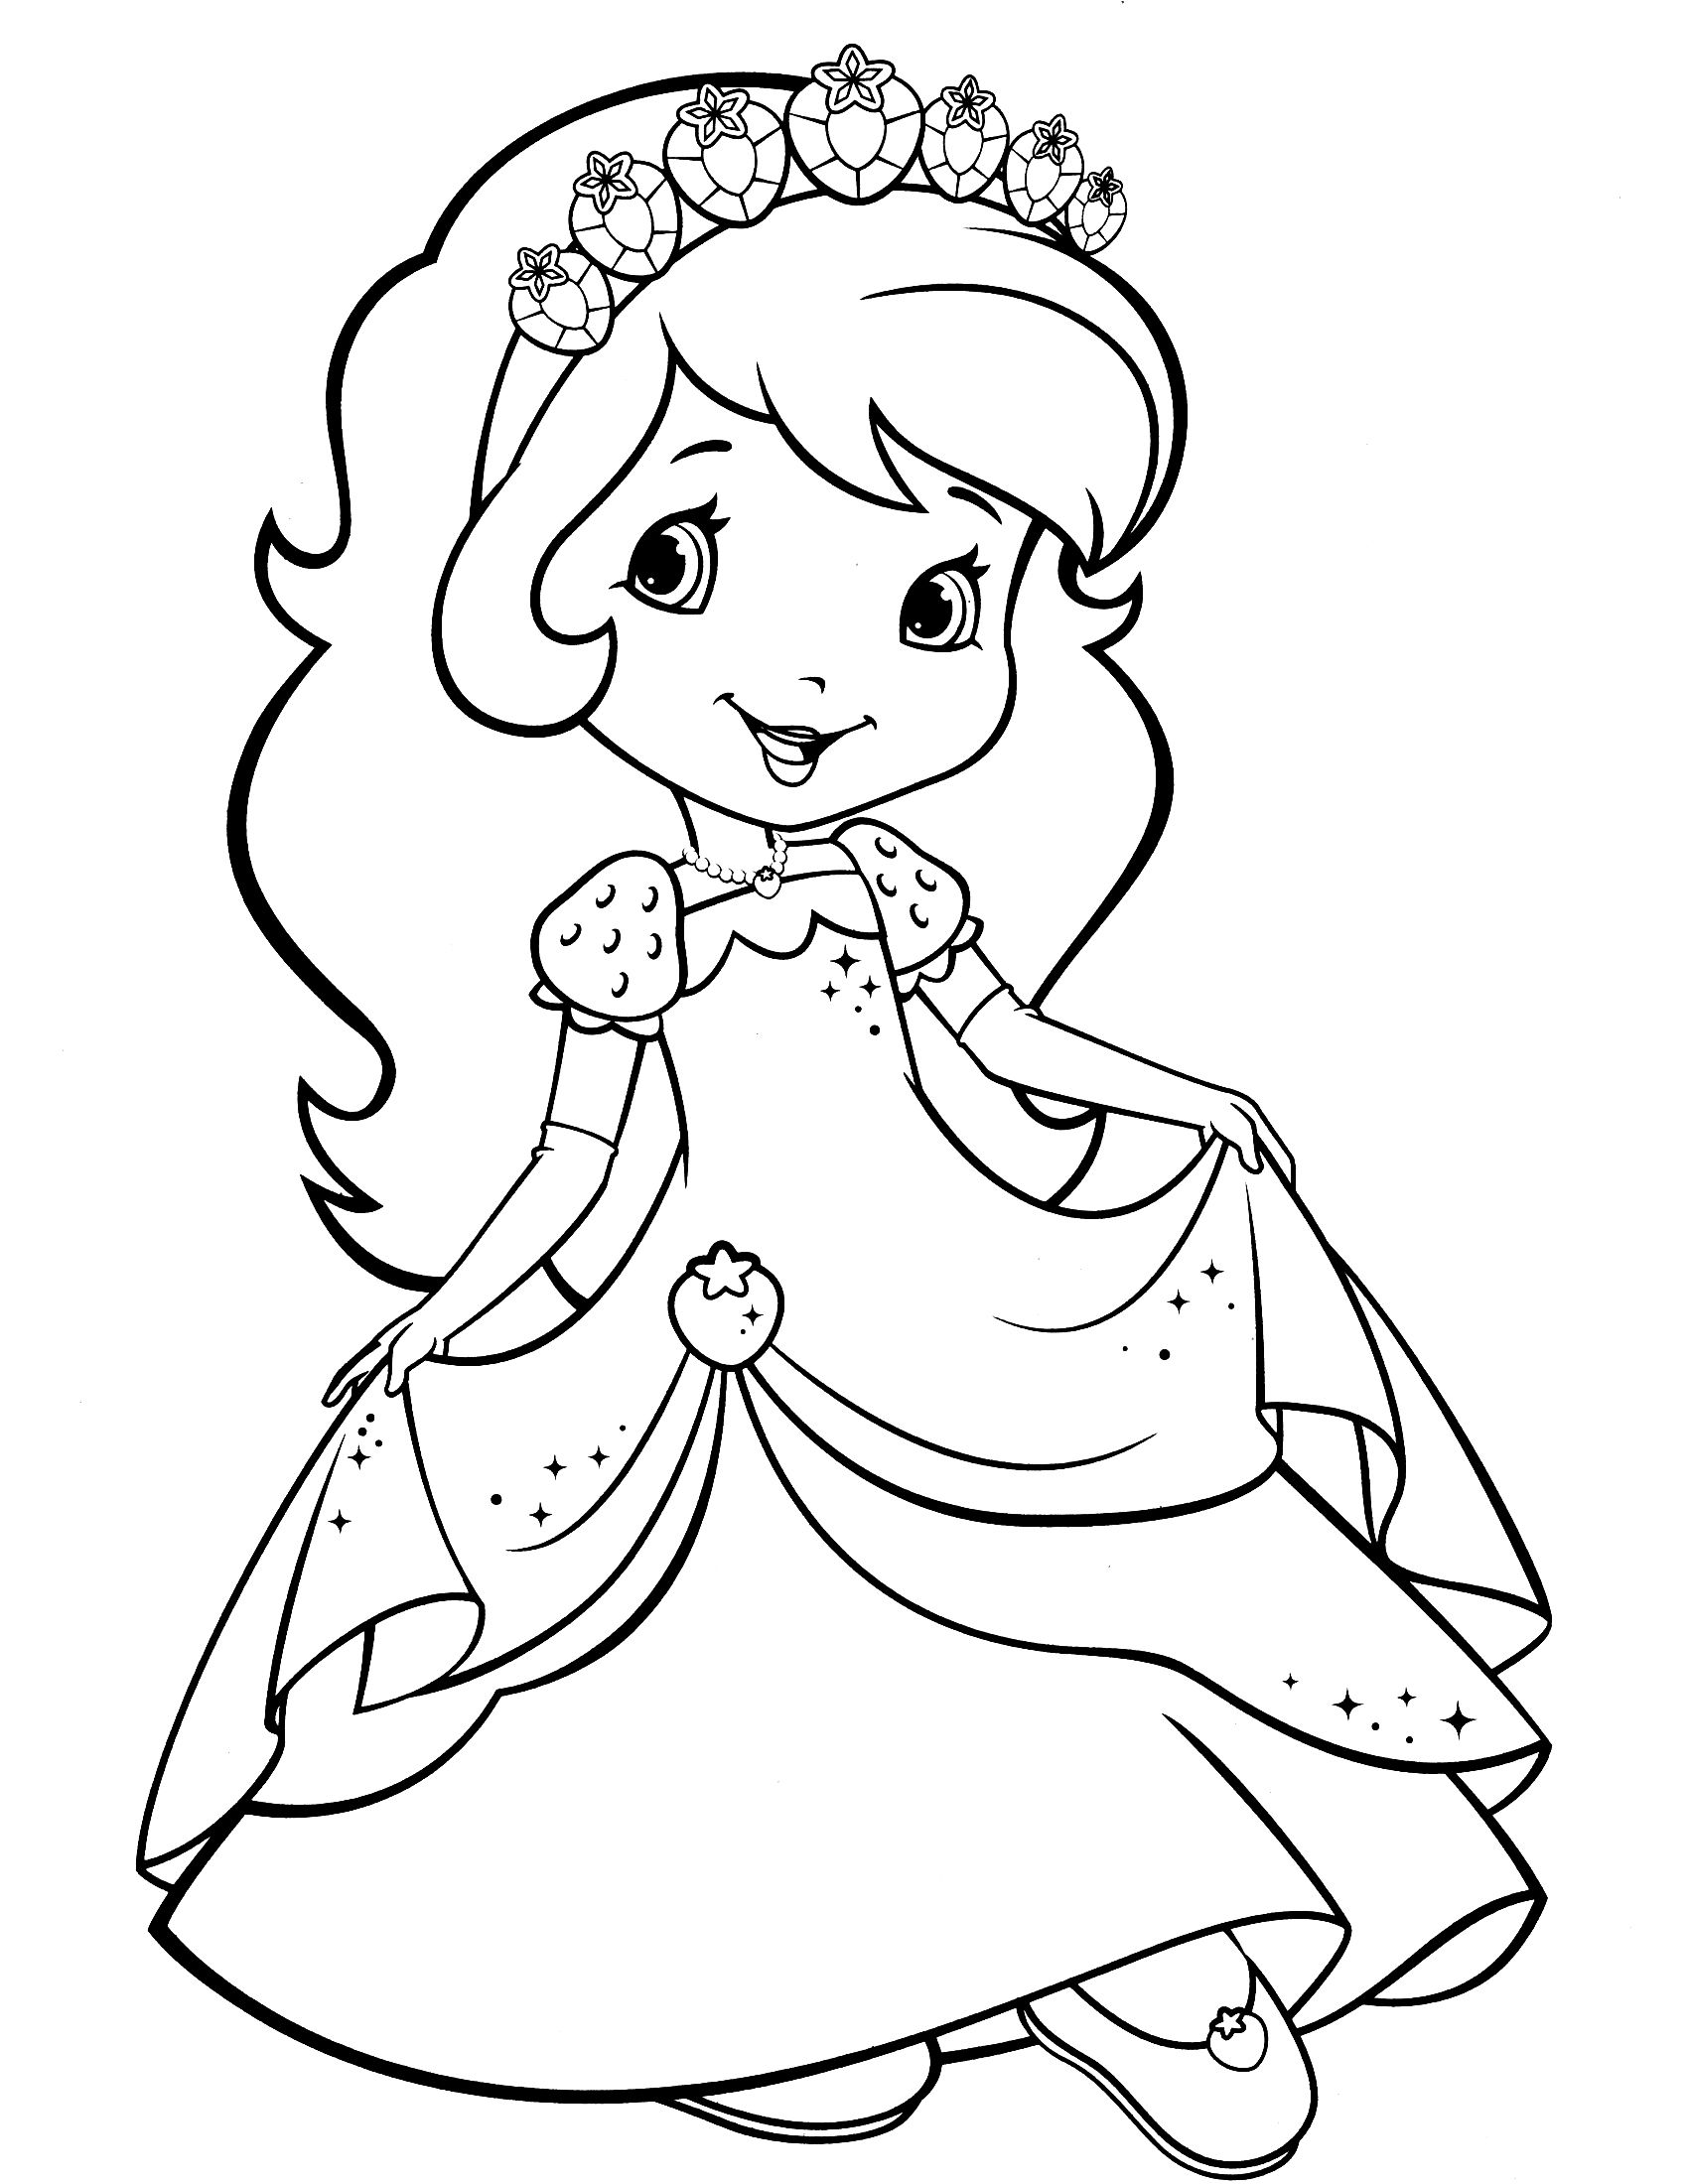 strawberry shortcake colouring pages to print strawberry shortcake coloring page princess coloring pages colouring strawberry shortcake print to 